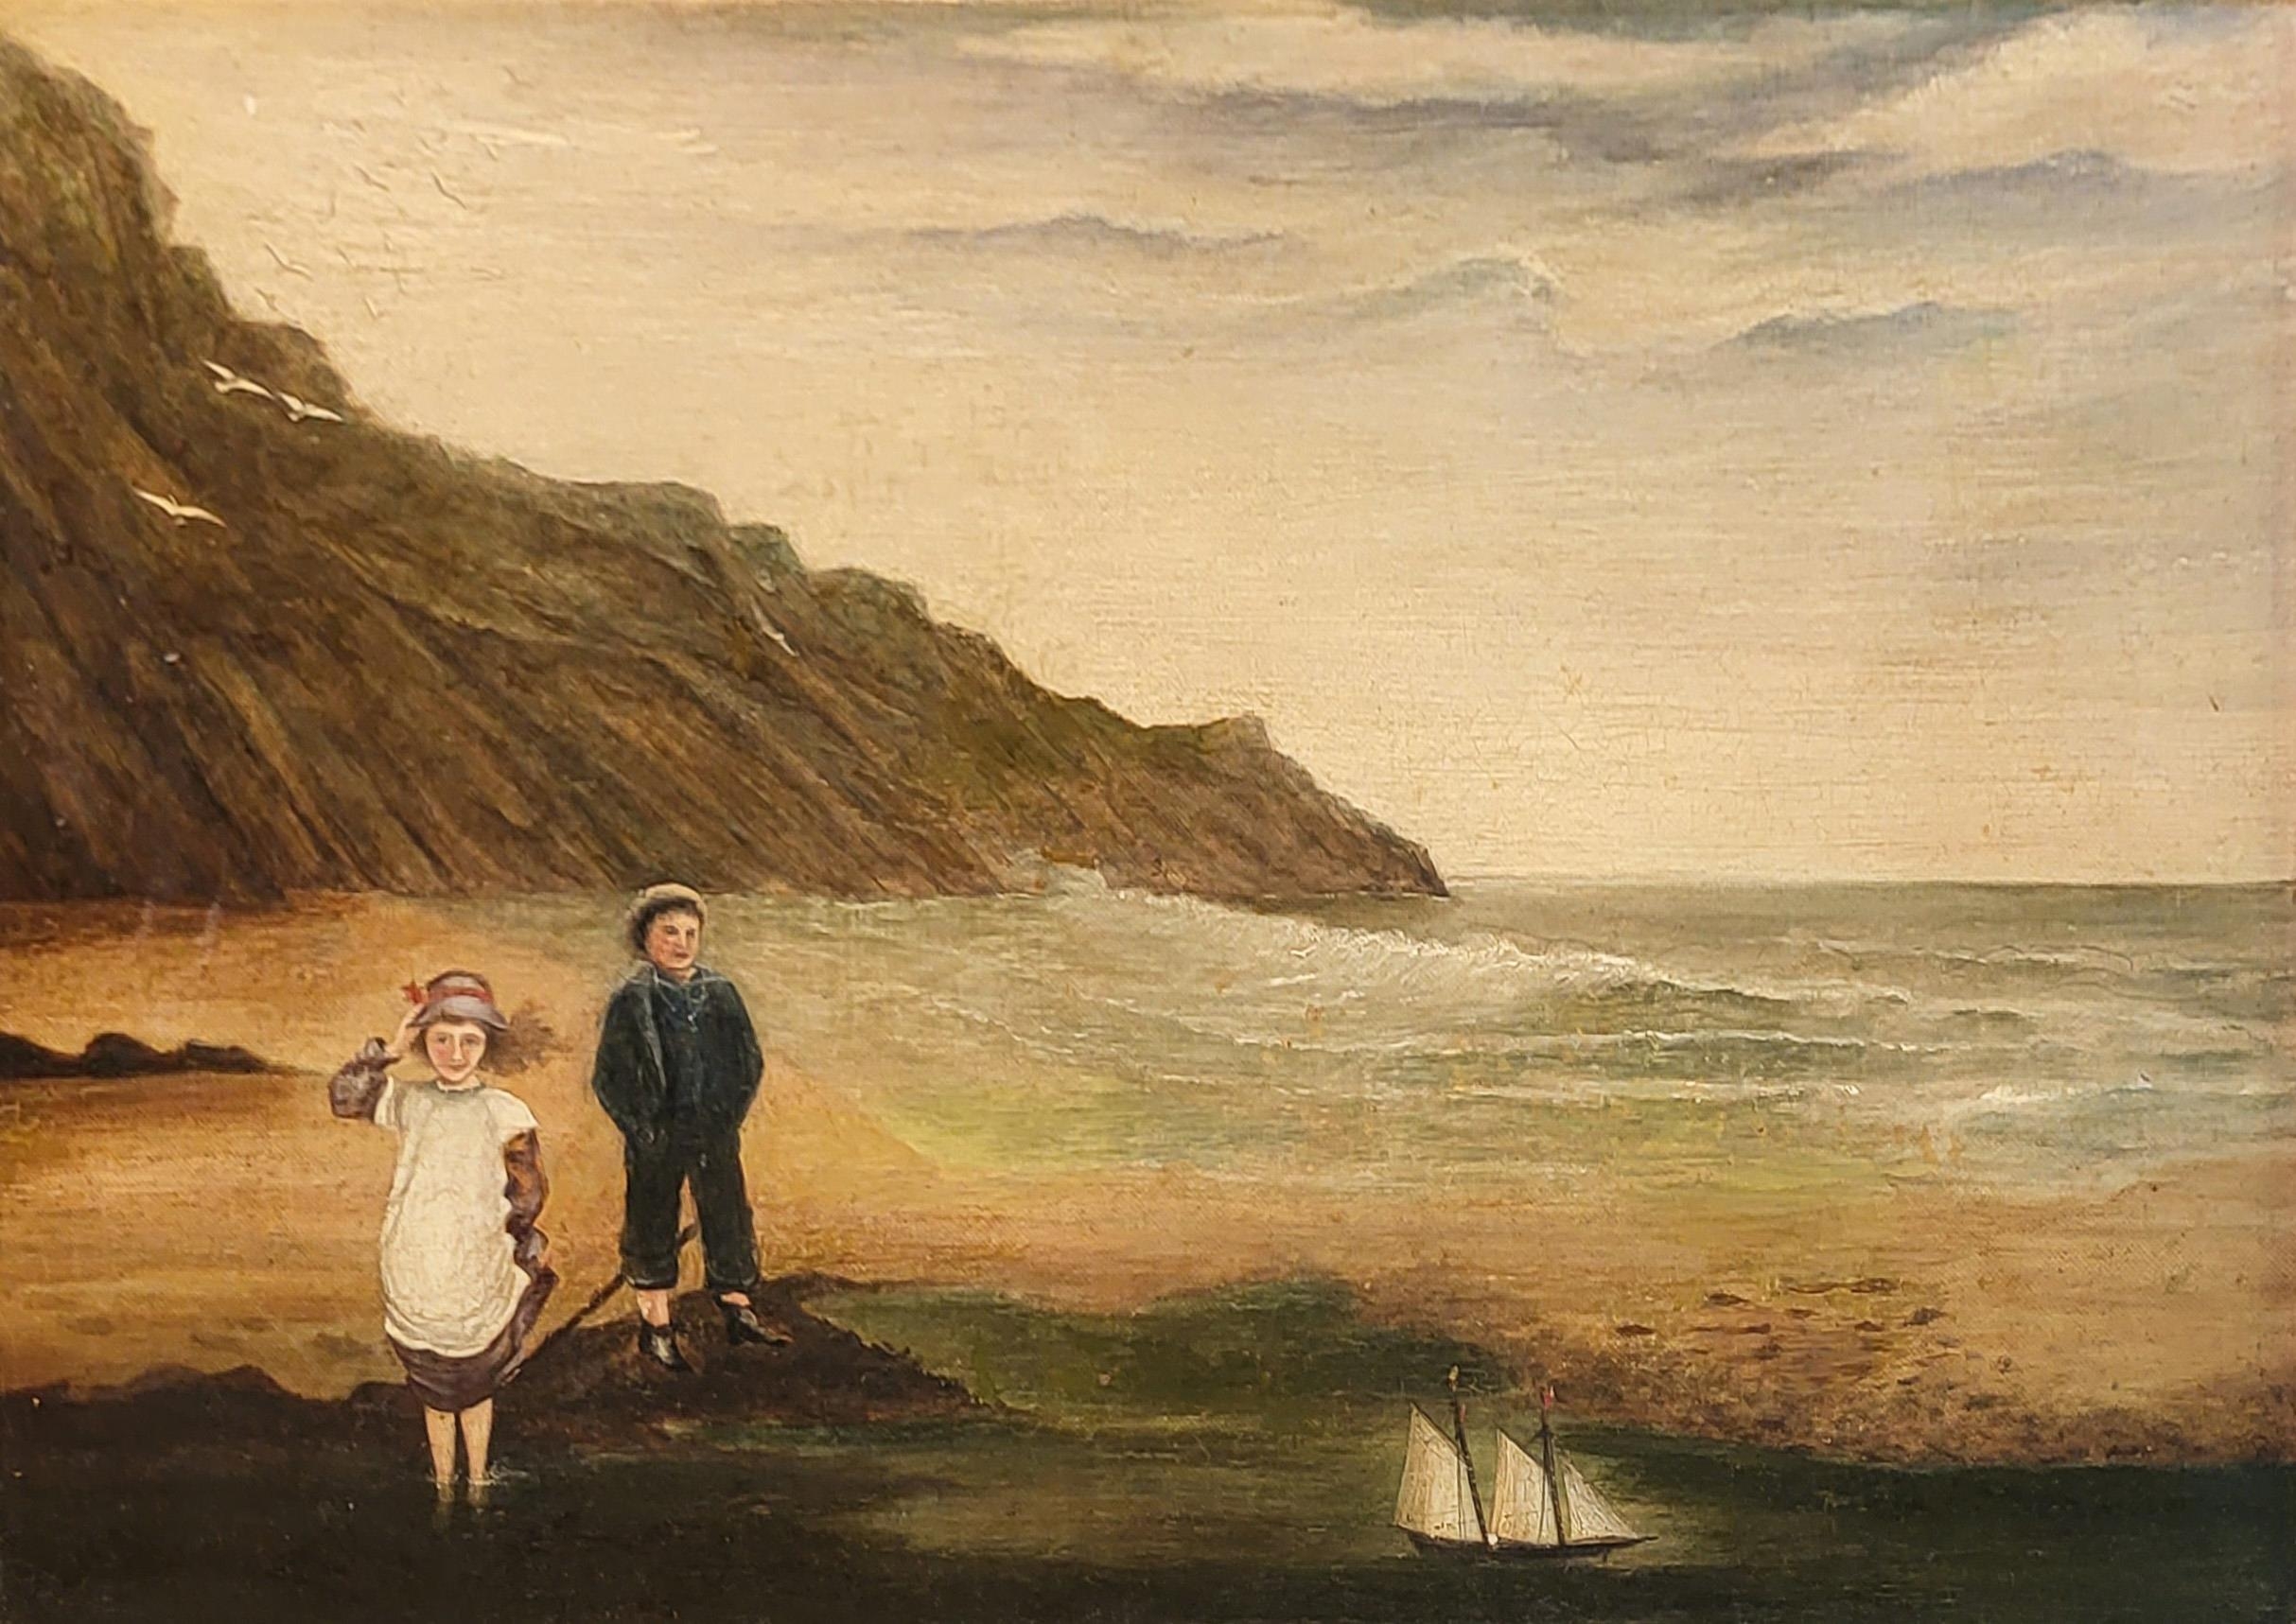 A VICTORIAN OIL ON CANVAS, COASTAL VIEW Children dressed in period attire with pond yacht, in